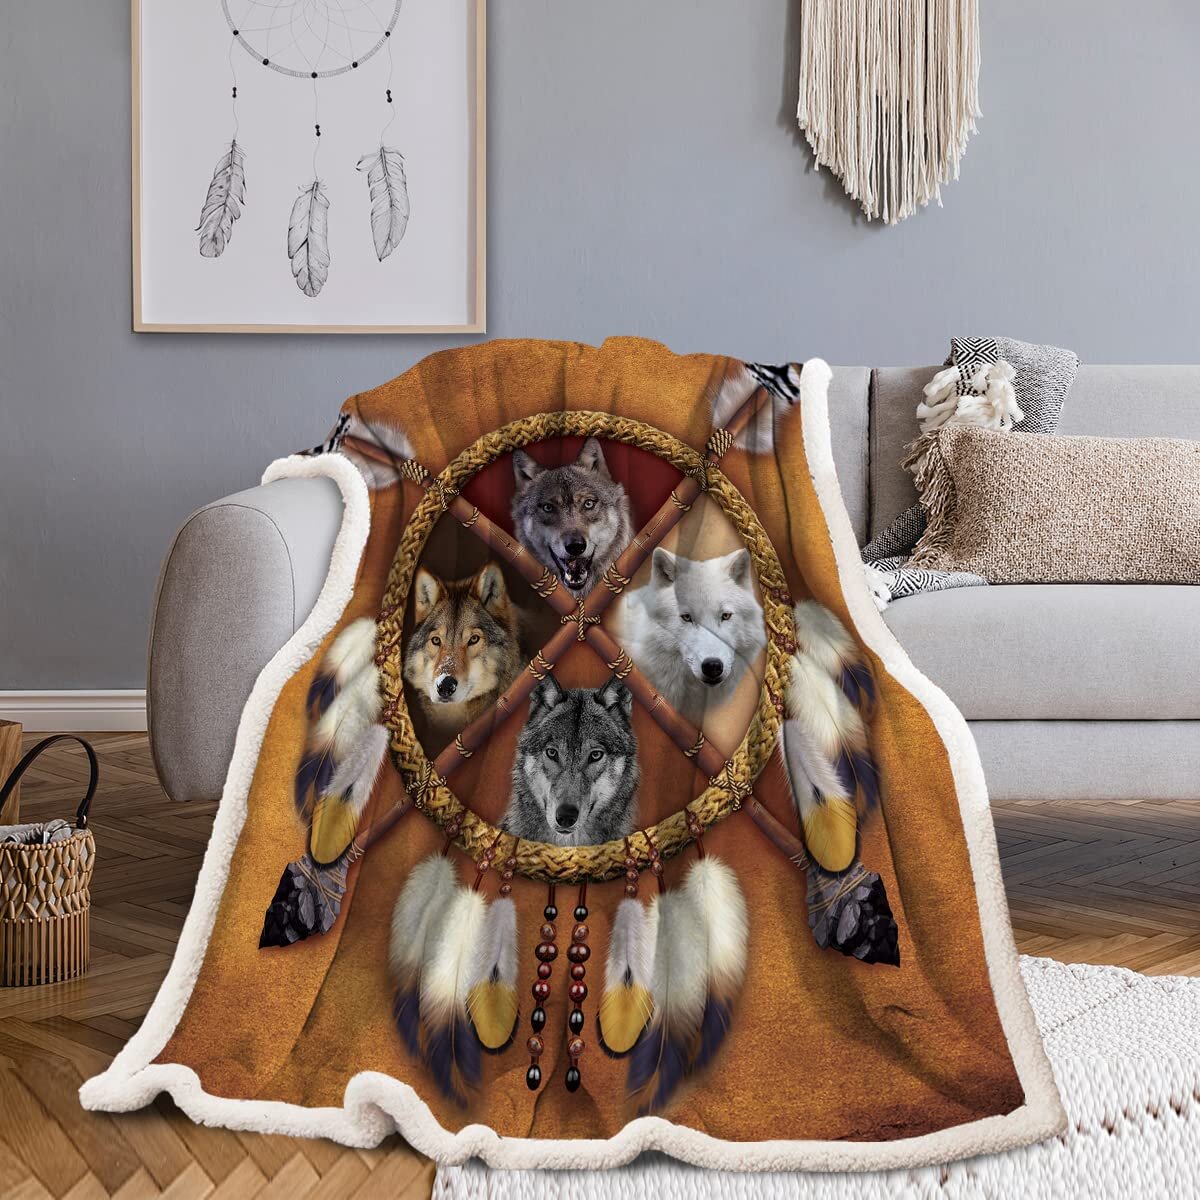 to My Dad Fleece Blanket Wolf Print You are A Man Like No Other Blanket White for Bed Sofa Chair Autumn Winter Living Room 50x60 Inch 